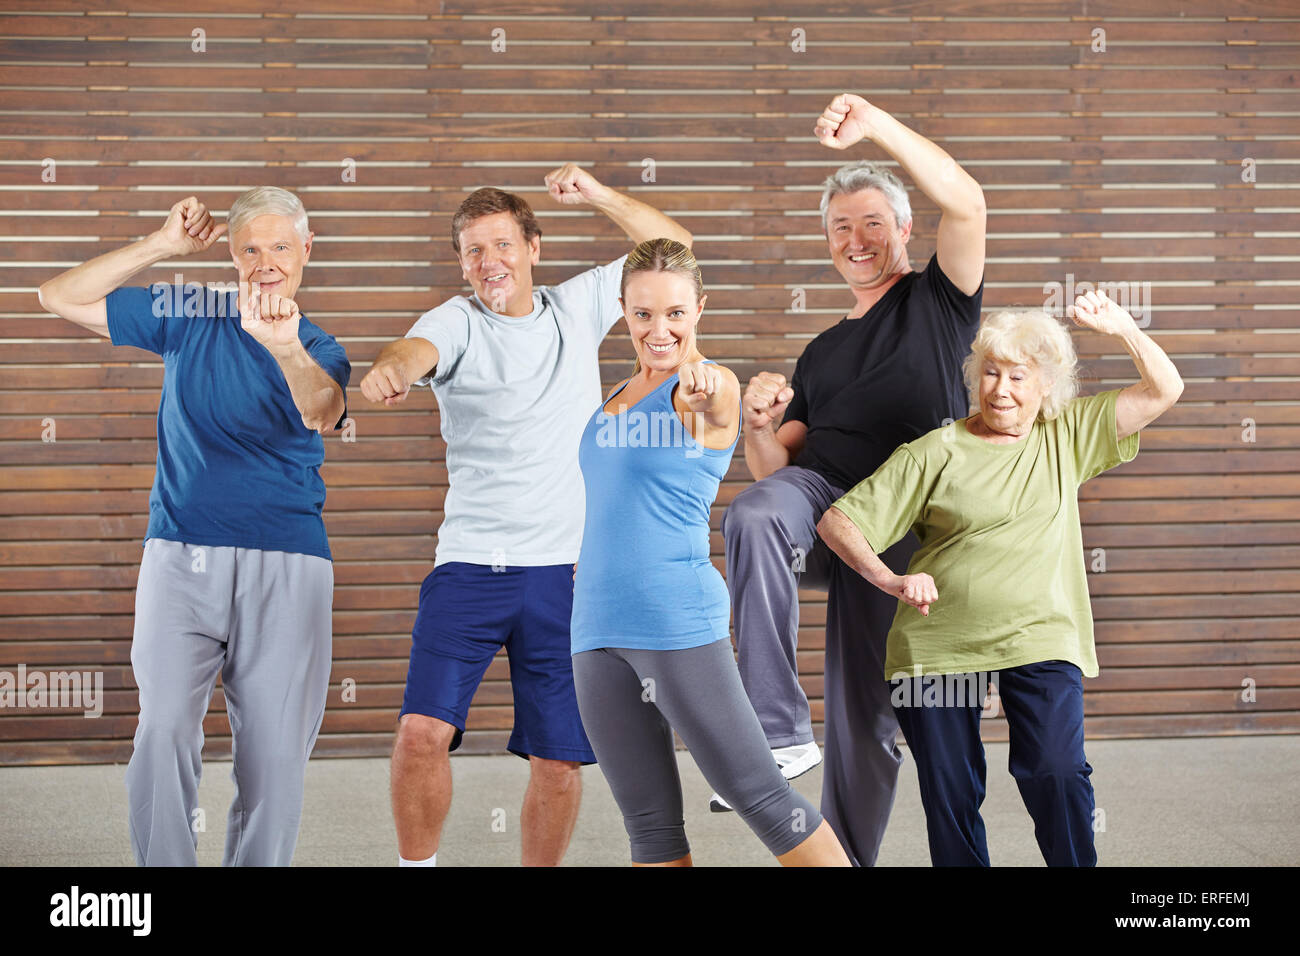 Active seniors with power and energy in gym learning self defense Stock Photo